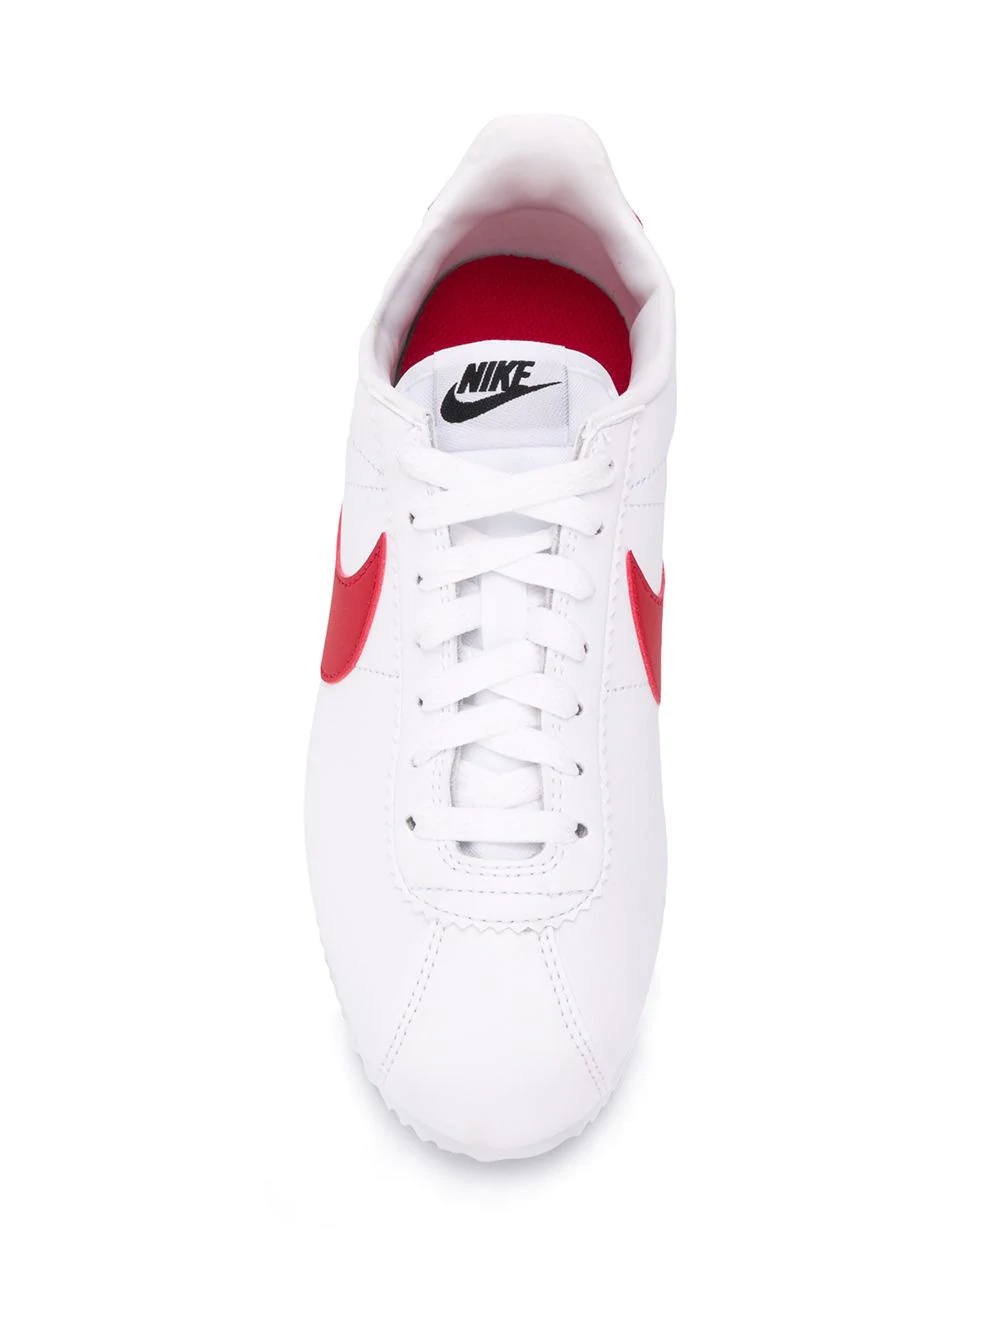 Classic Cortez "White/Varsity Red" leather sneakers - 4